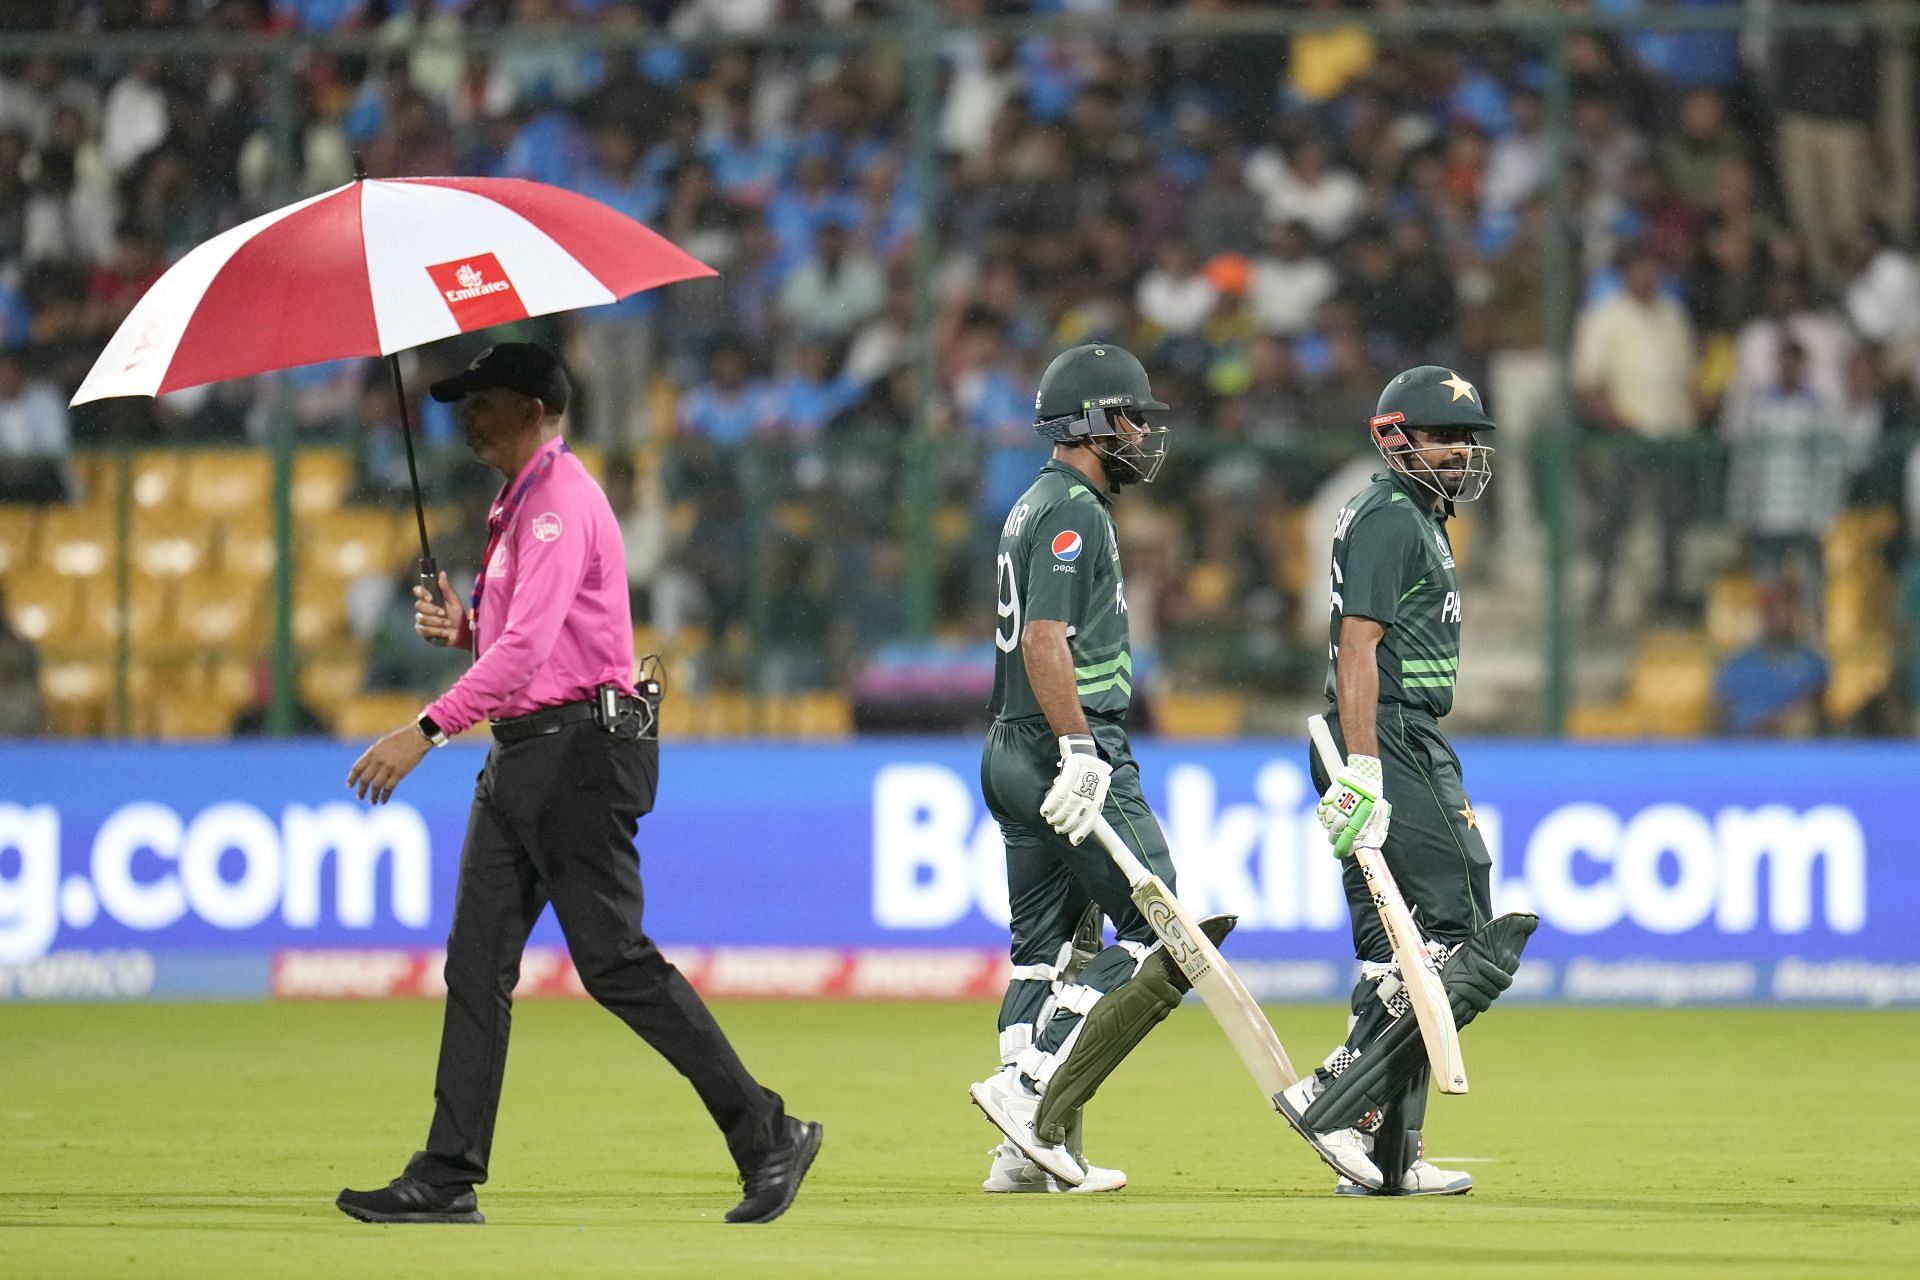 Pakistan beat New Zealand in their last match via the DLS method to keep their semi-final hopes alive. [P/C: AP]